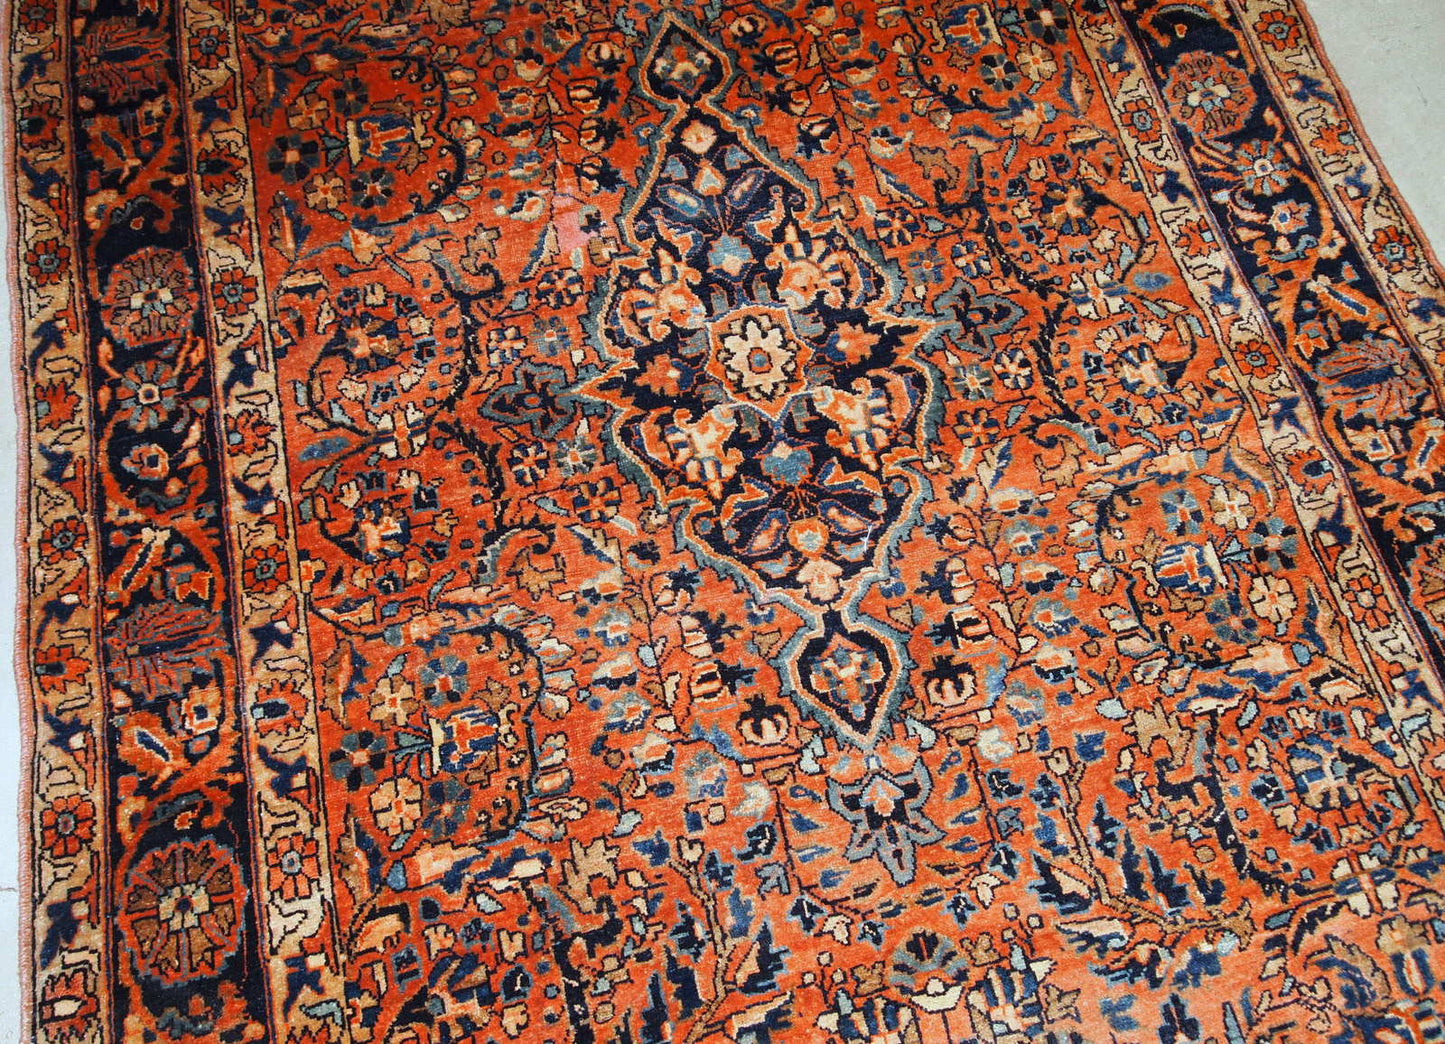 Handmade antique Sarouk rug from the beginning of 20th century. The rug is in original good condition made in red wool.